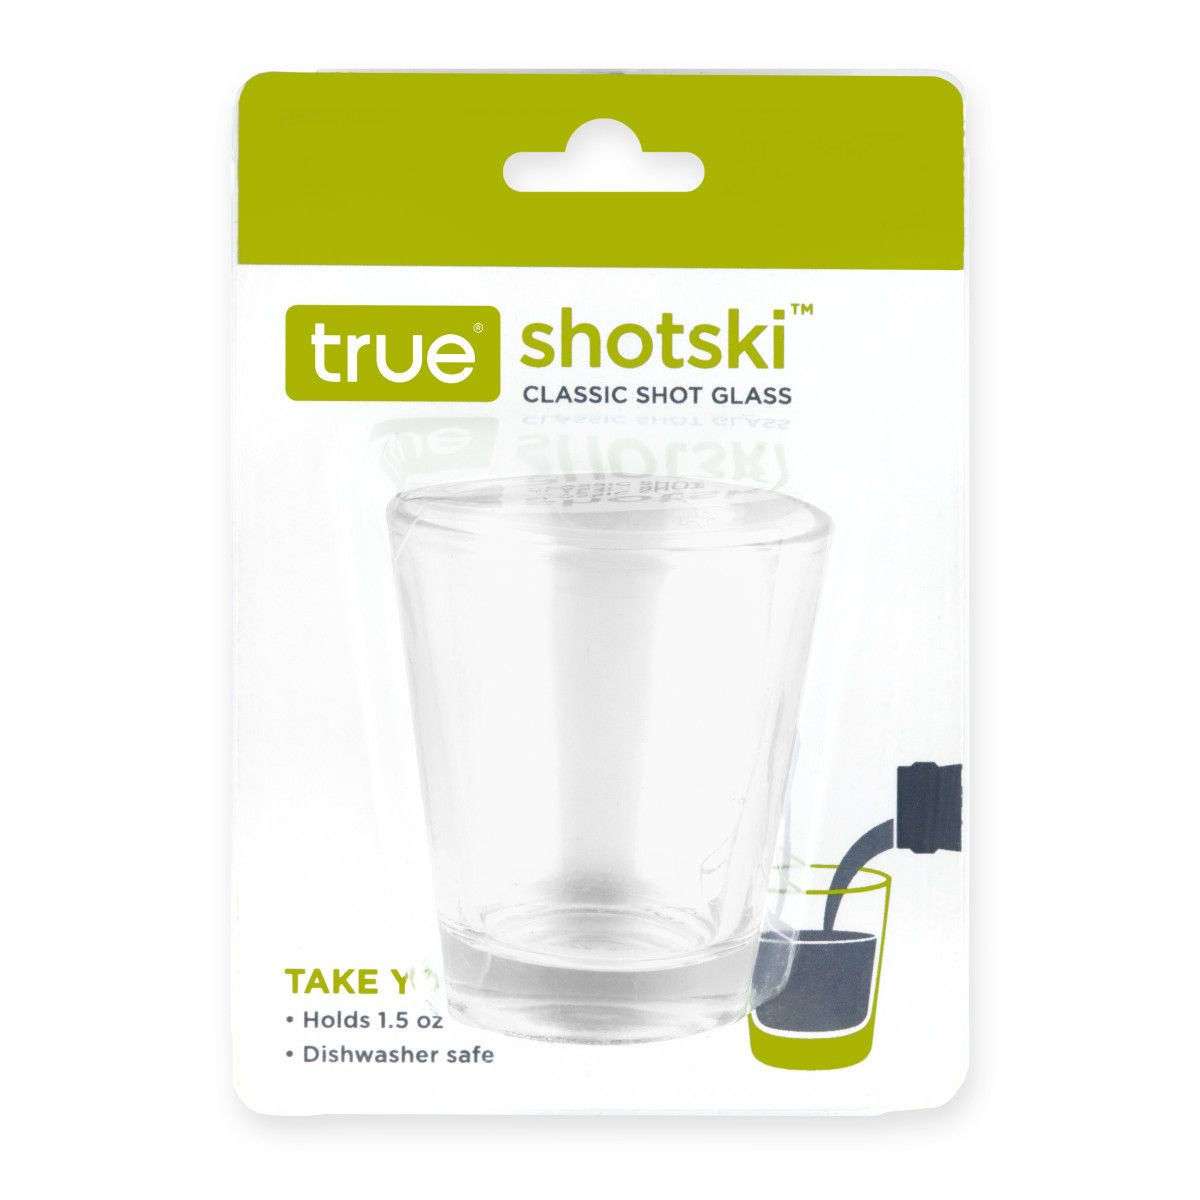 2 oz. Glass Shot Glass - Carded, Pak-it Products